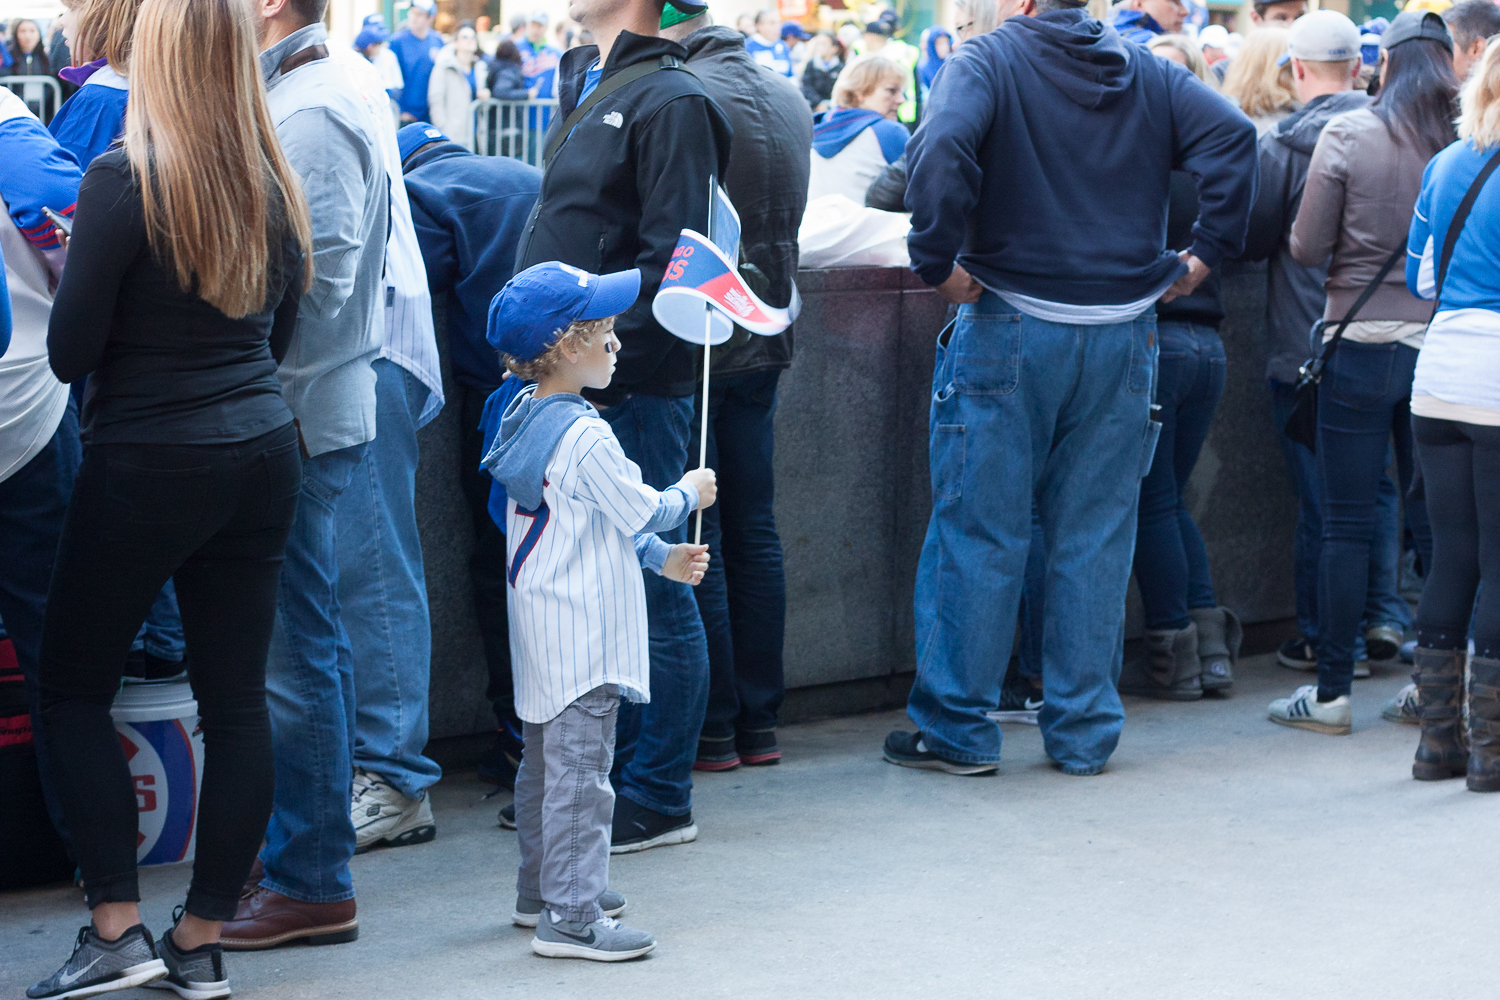 Cubs_Win_World_Series_Laura_Suprenant_Photography-1.jpg